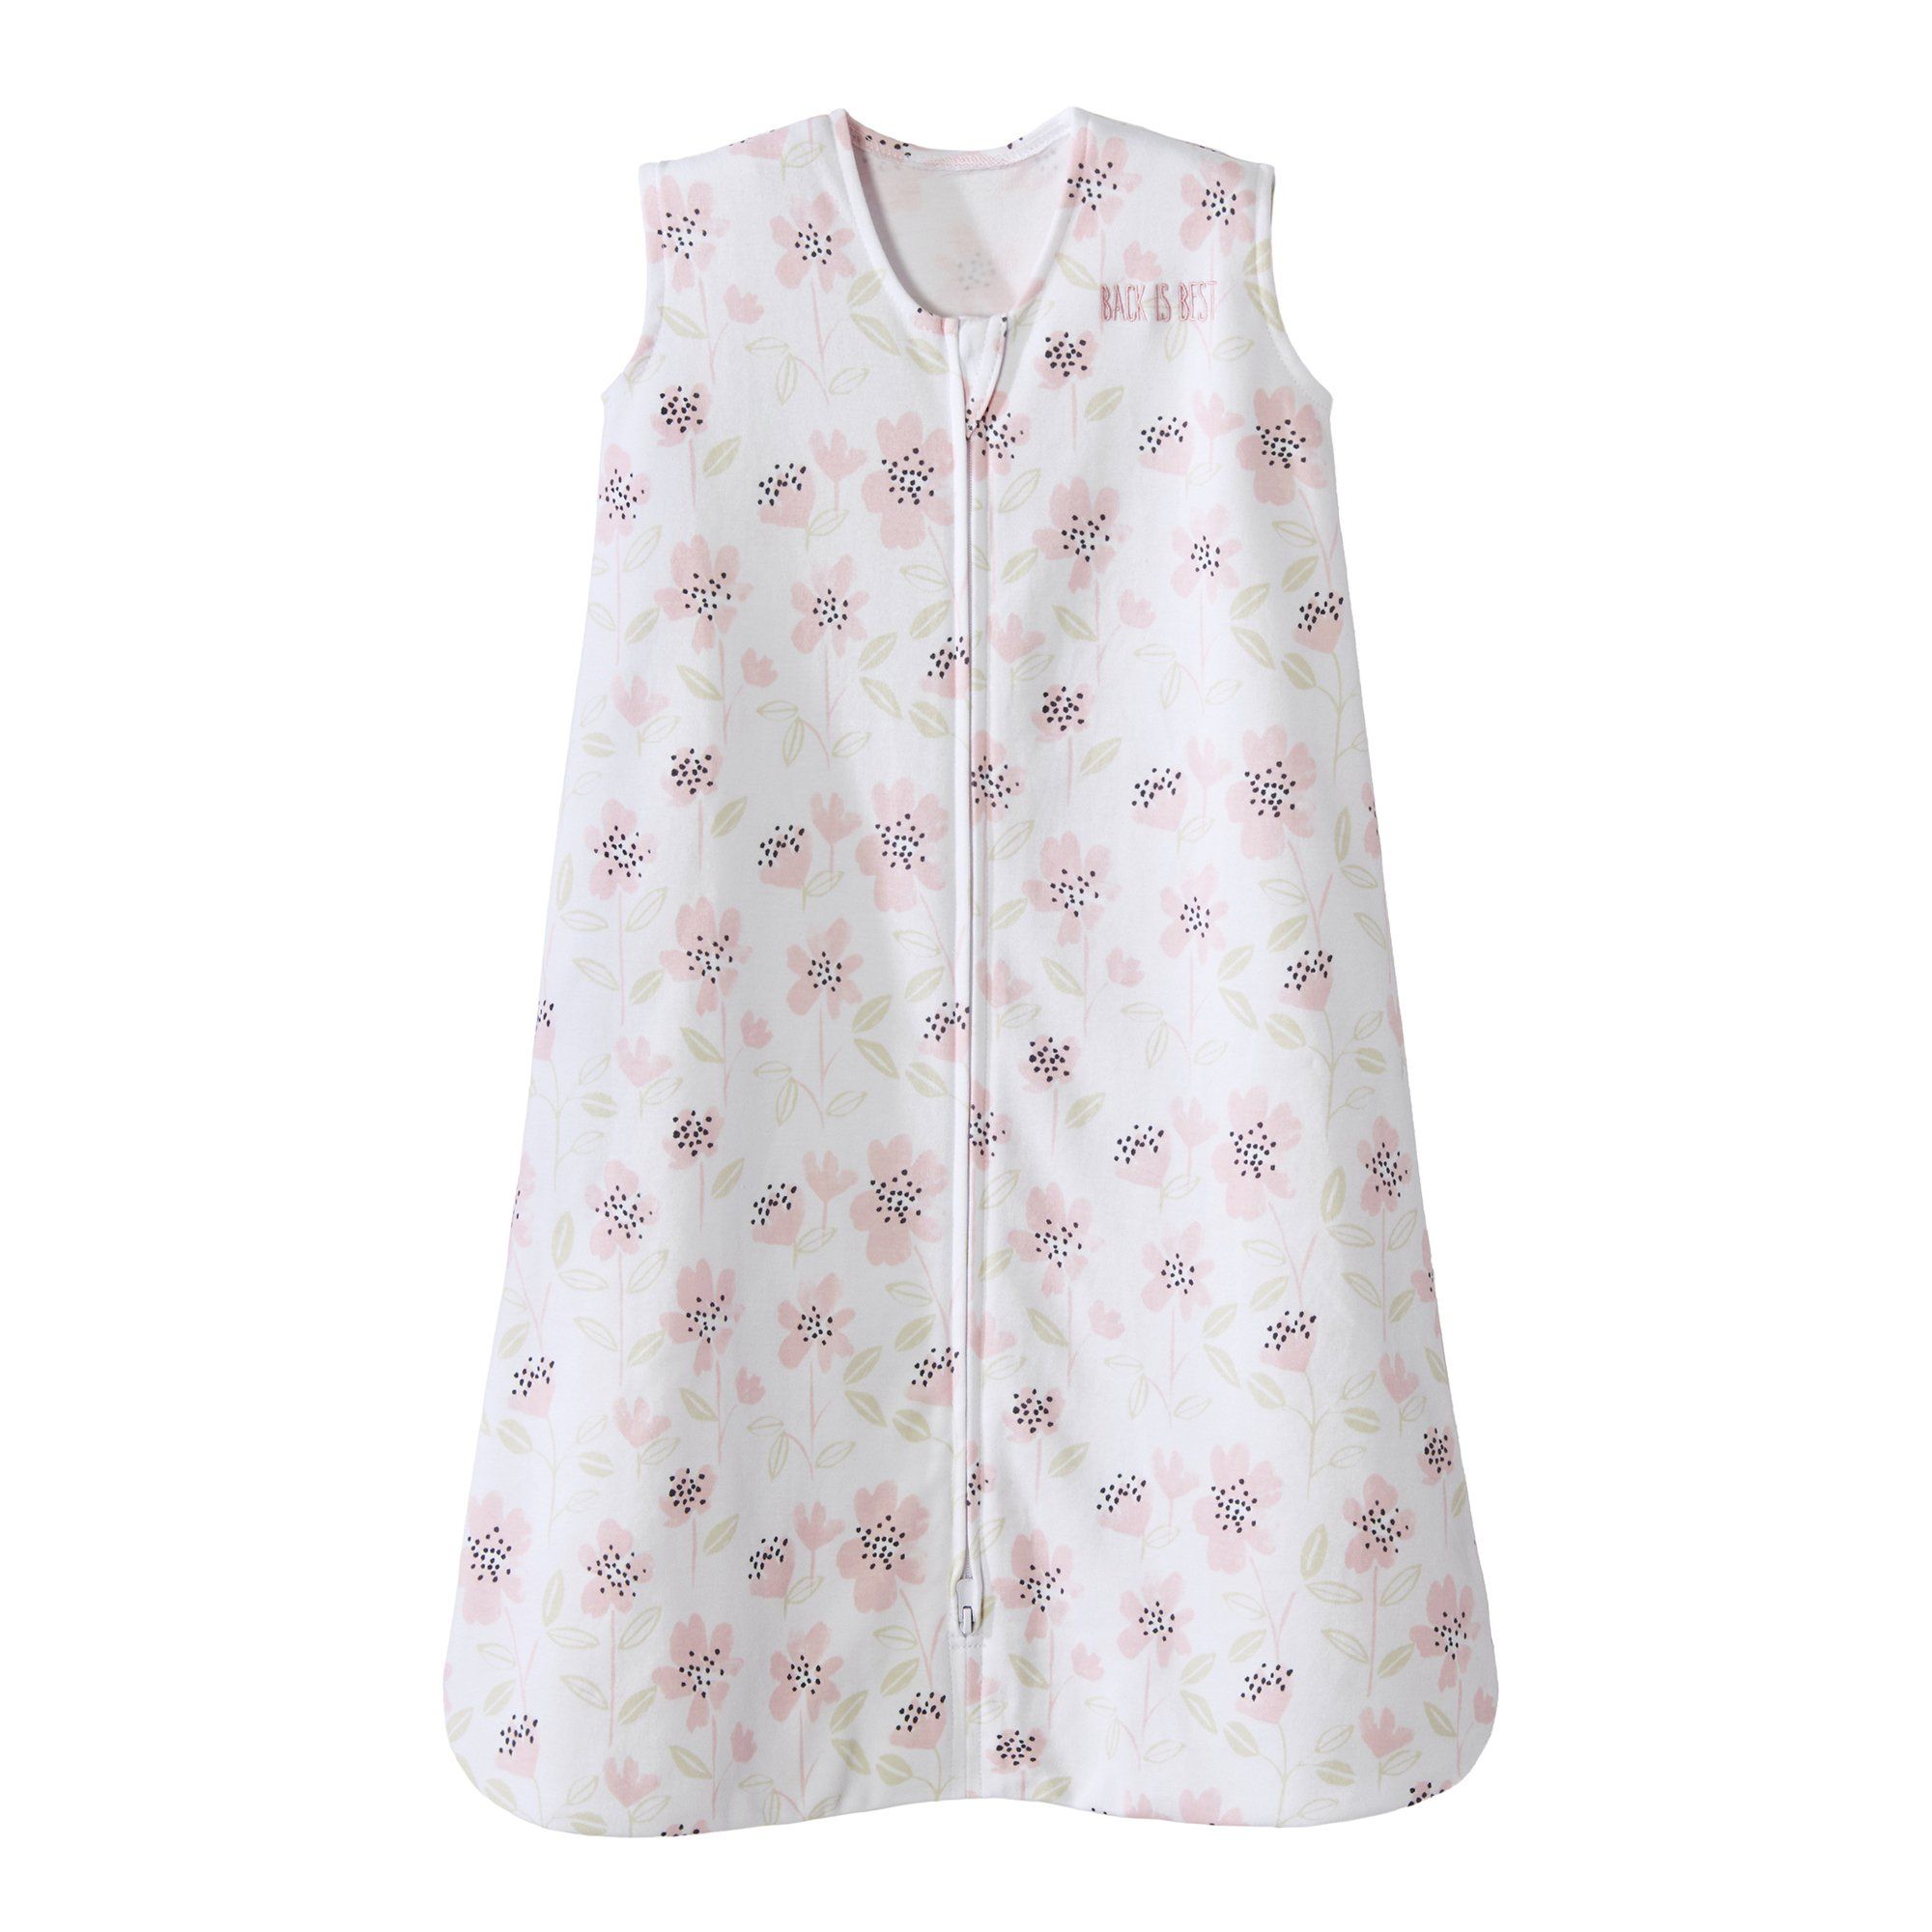 HALO Wearable Blanket, Blush Wildflower, Large (12 to 18 Months) - 1 ct